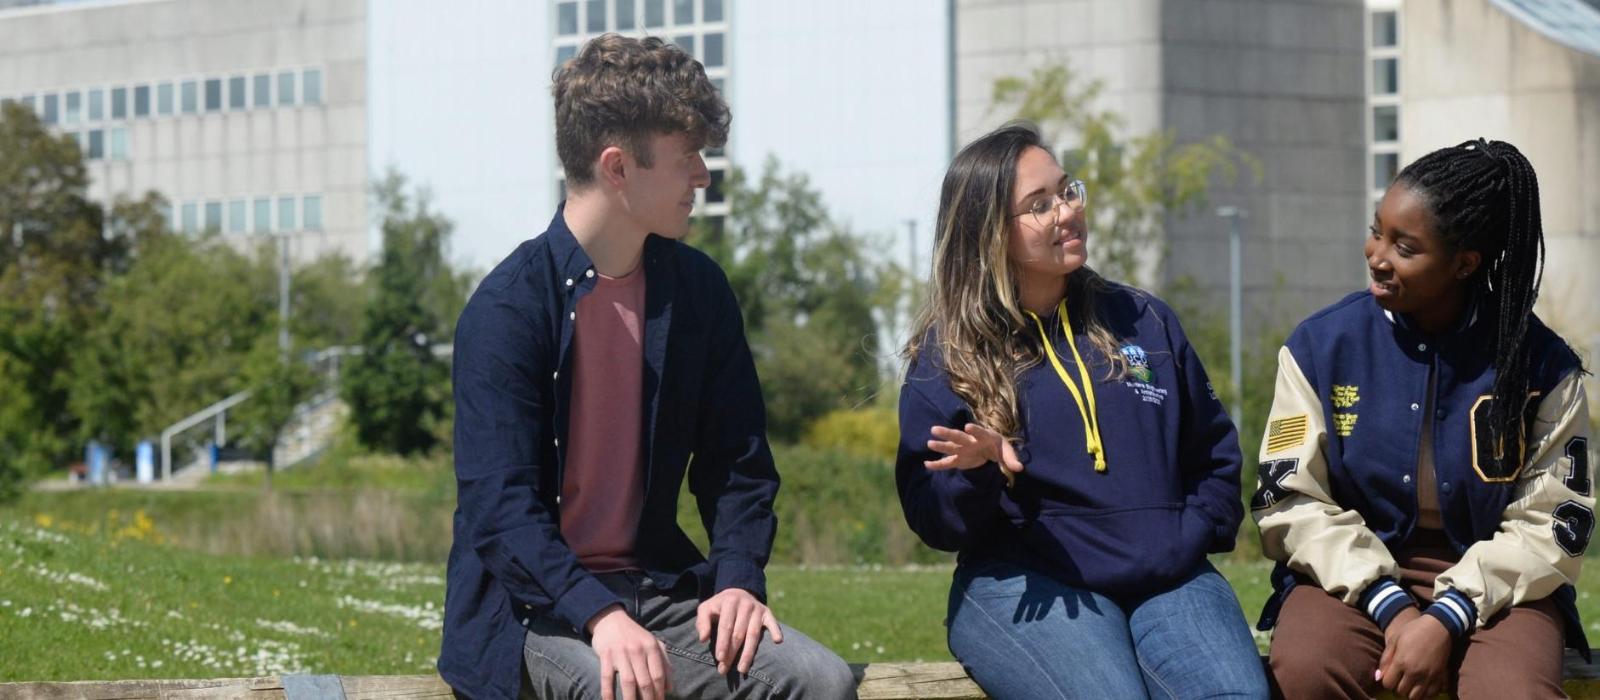 Three students sitting and talking outdoors